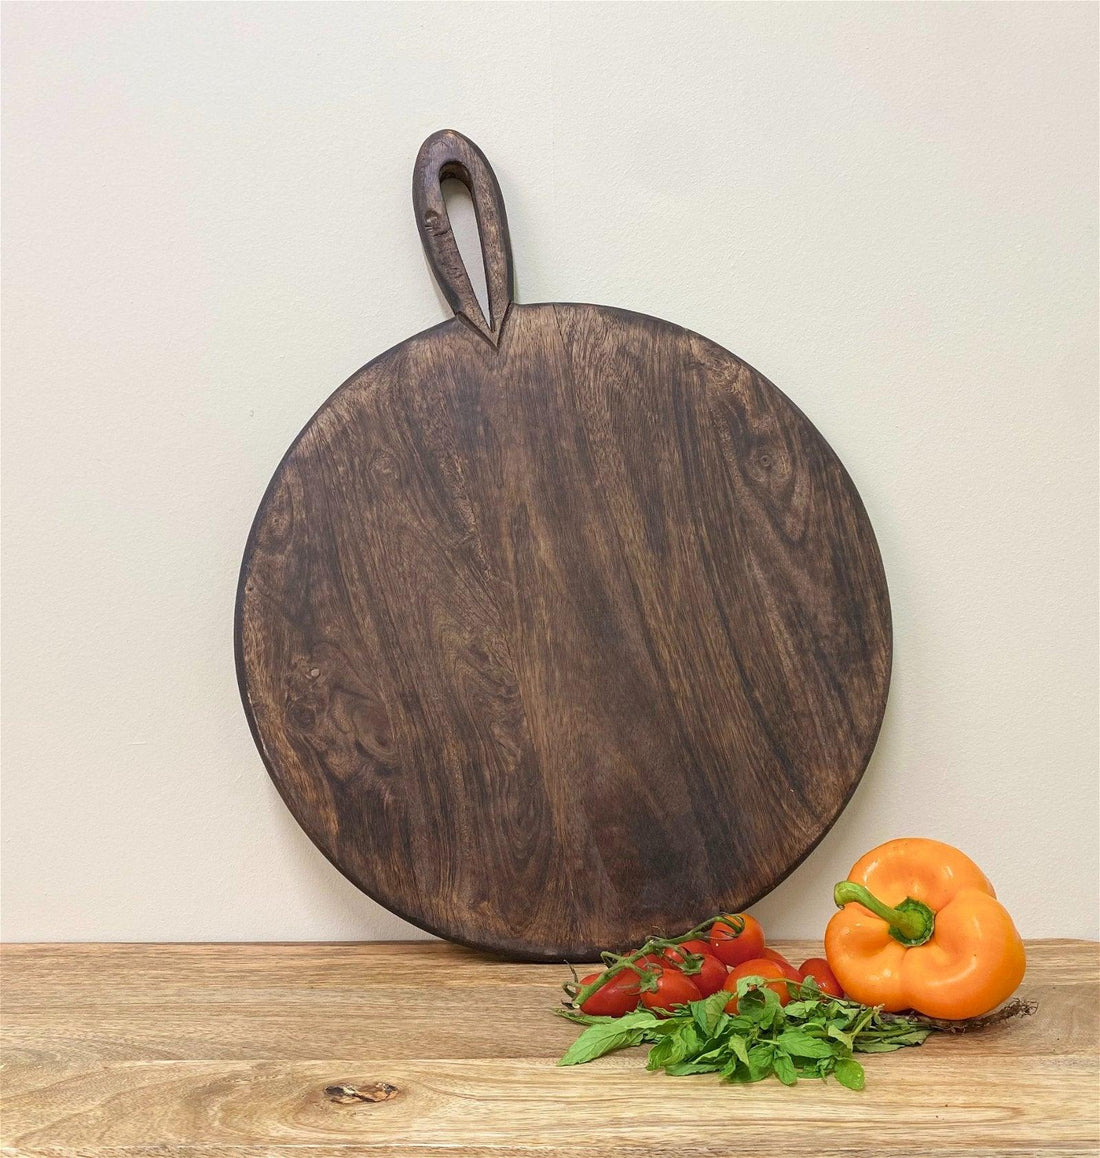 Circular Wooden Chopping Board With Carved Handle 49cm - £33.99 - Trays & Chopping Boards 